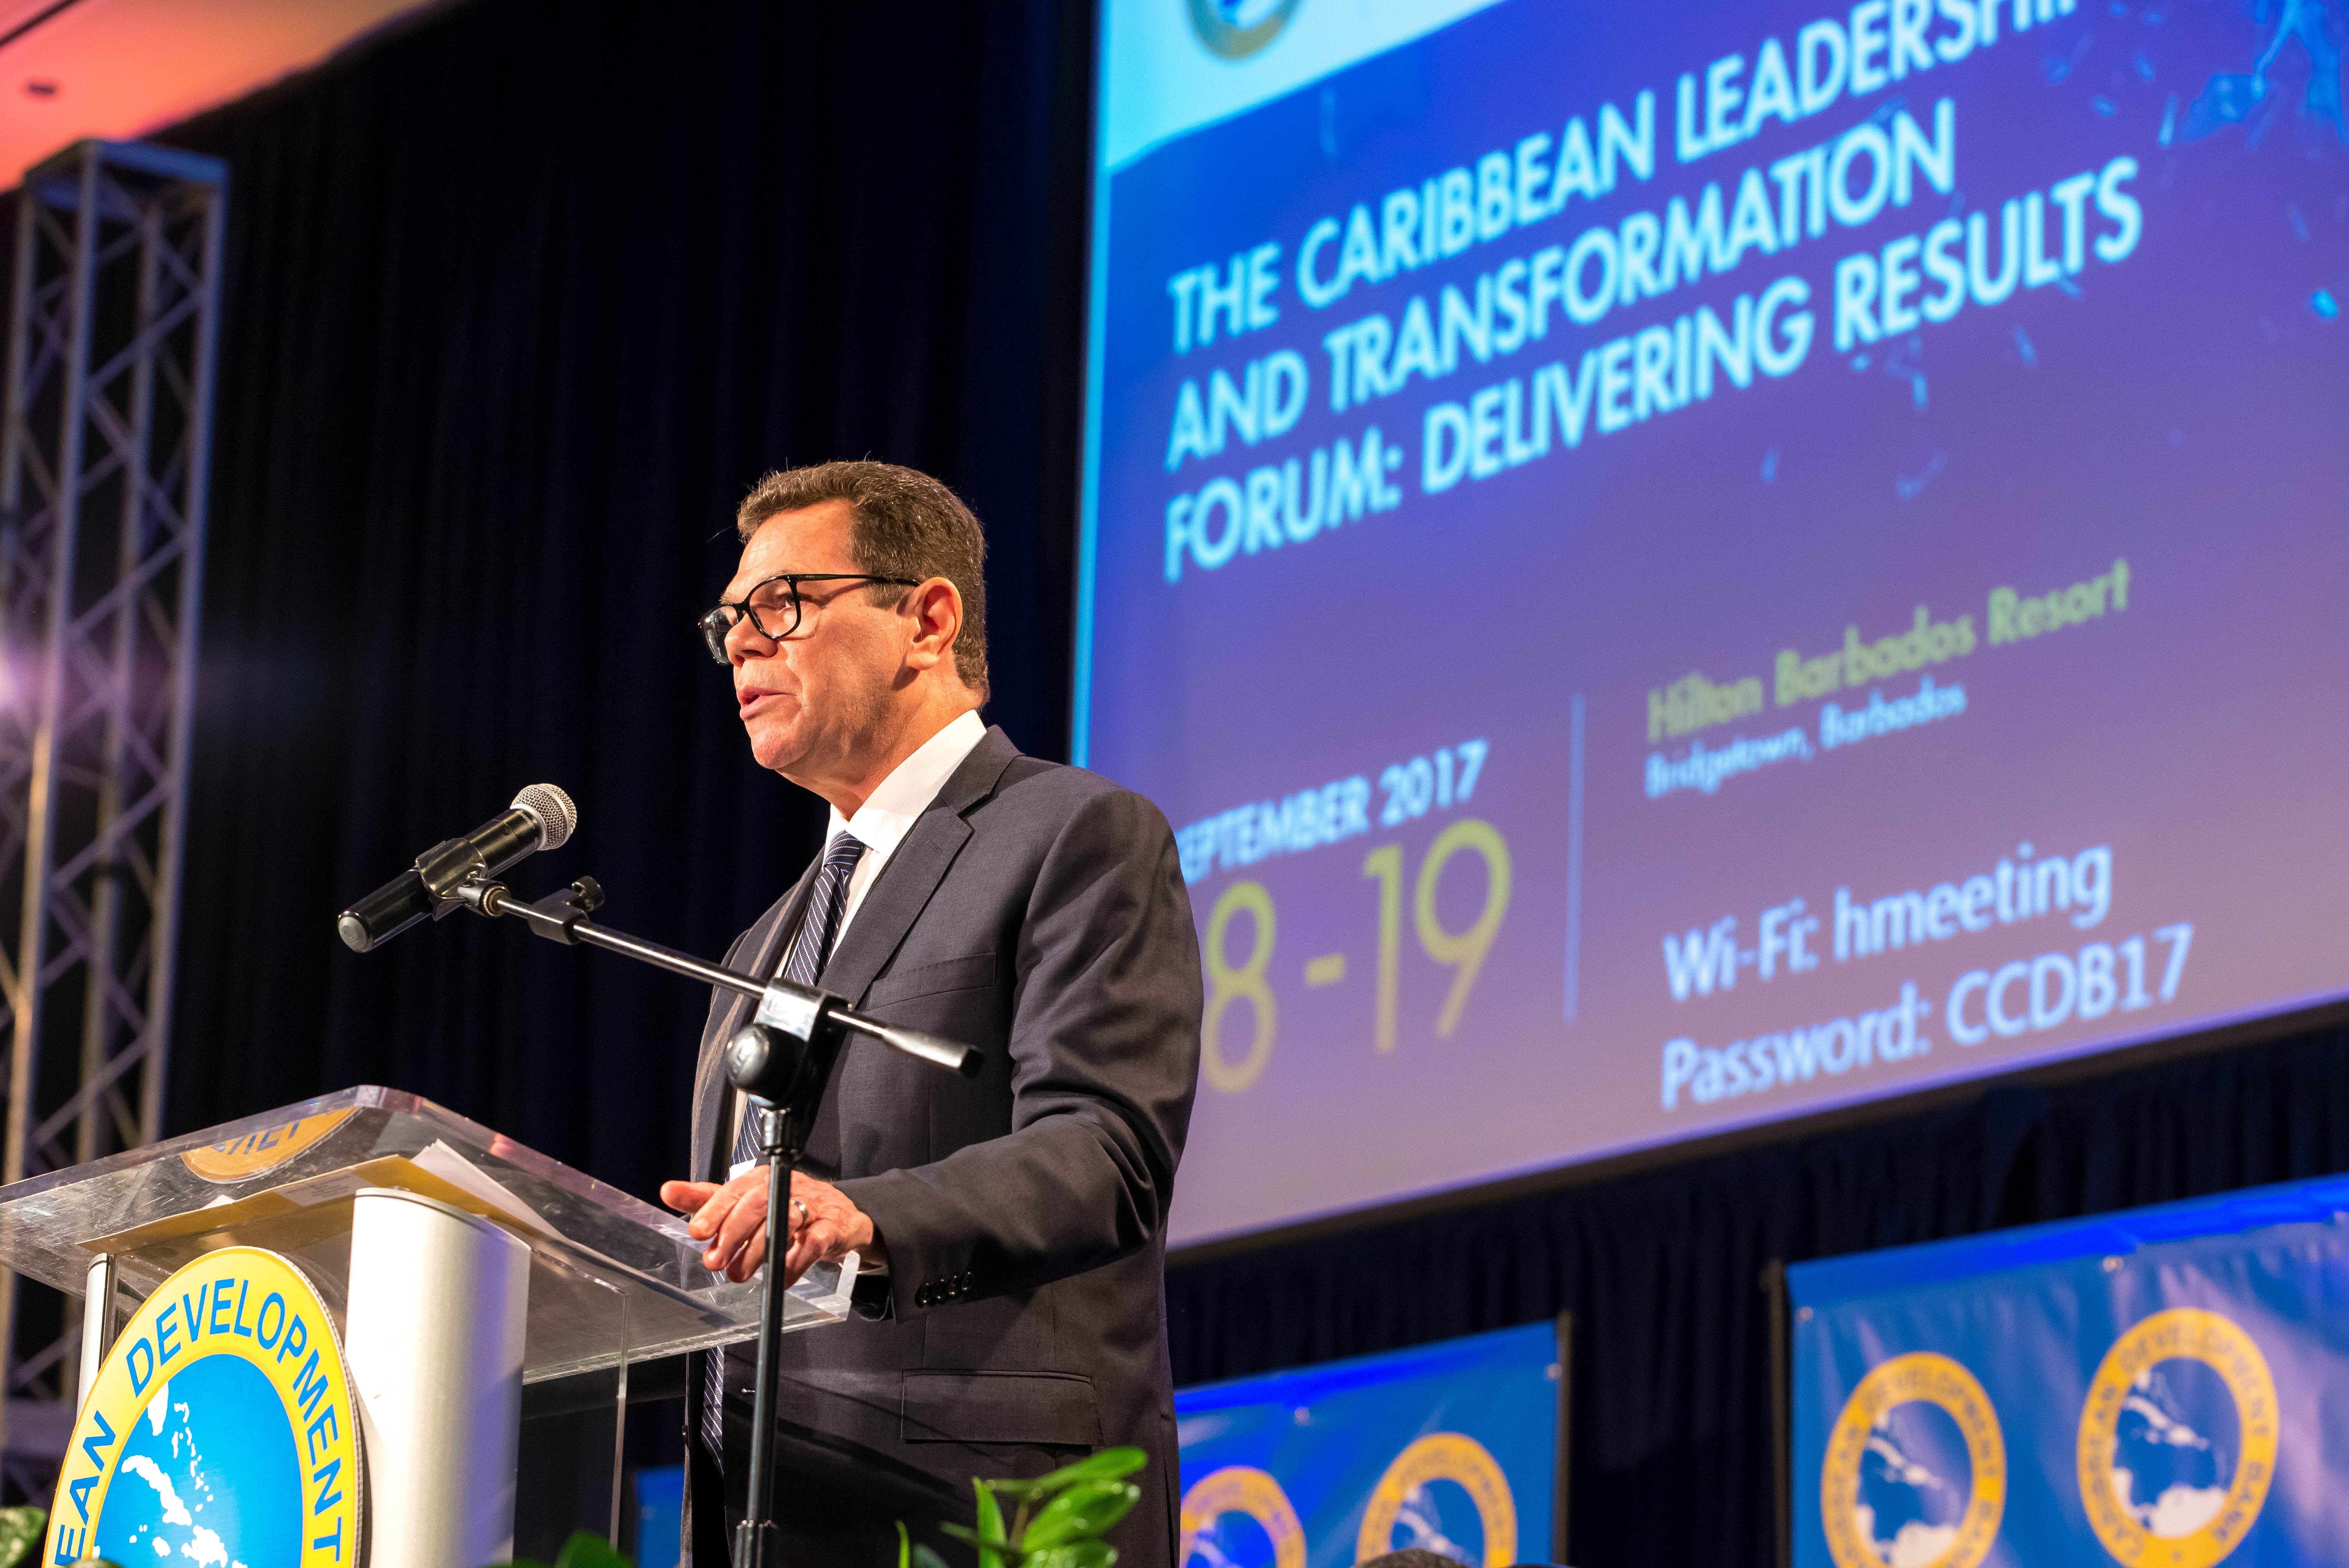 Dr. Wm. Warren Smith, President, Caribbean Development Bank, speaks at the opening ceremony of the Caribbean Leadership and Transformation Forum, on September 18, 2017.